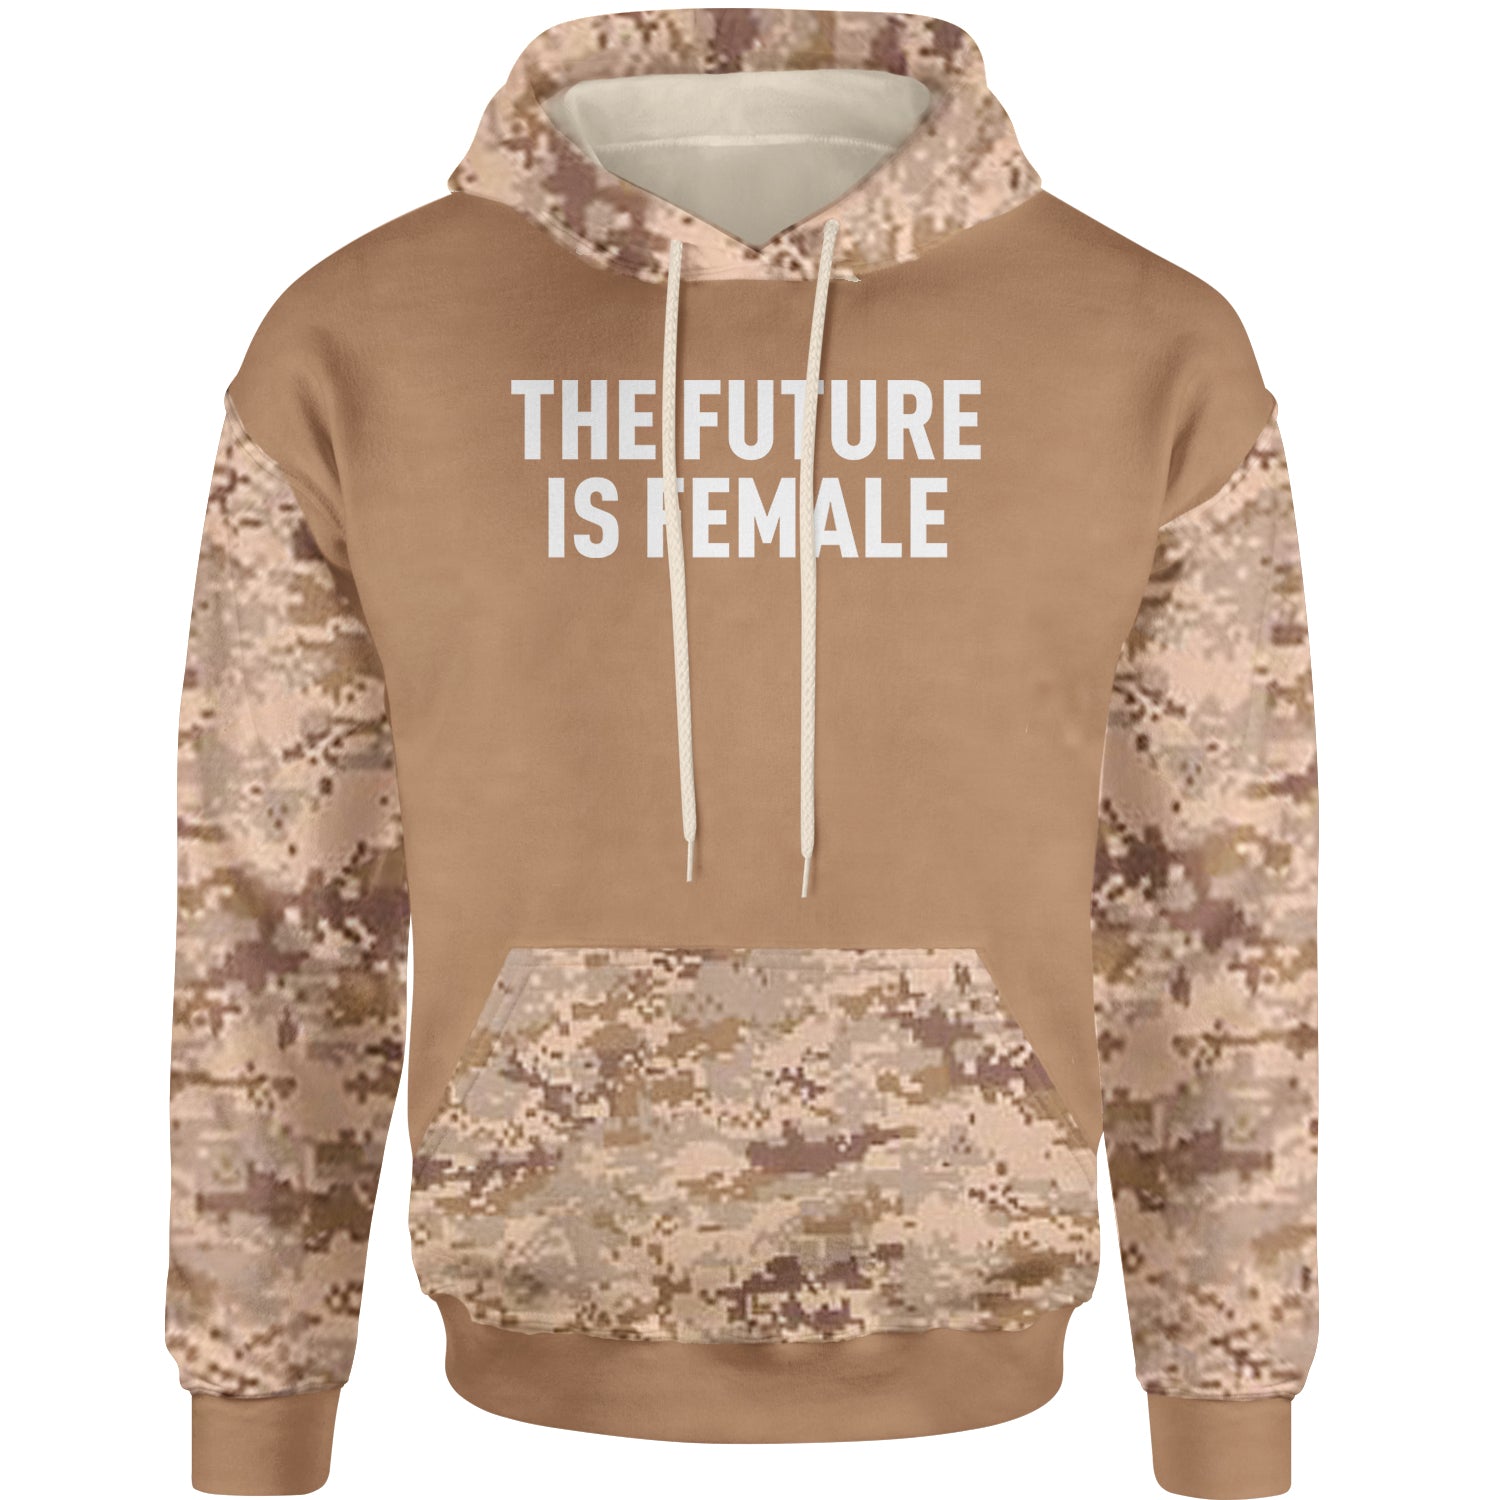 The Future Is Female Feminism Adult Hoodie Sweatshirt female, feminism, feminist, femme, future, is, liberation, suffrage, the by Expression Tees